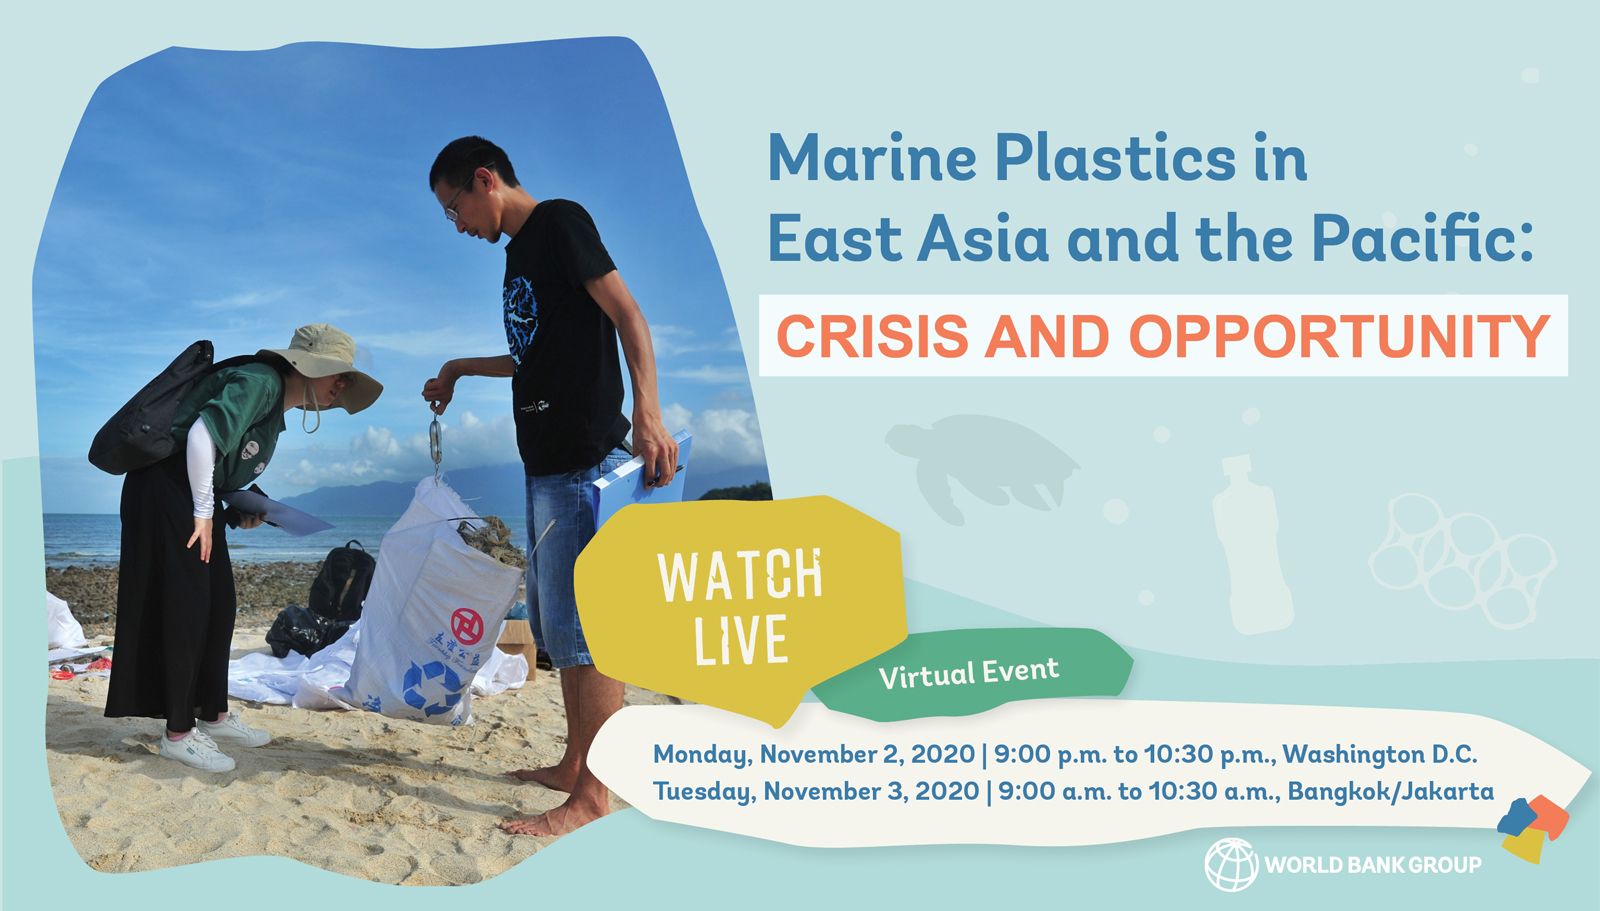 Marine Plastics in East Asia and the Pacific: Crisis and Opportunity